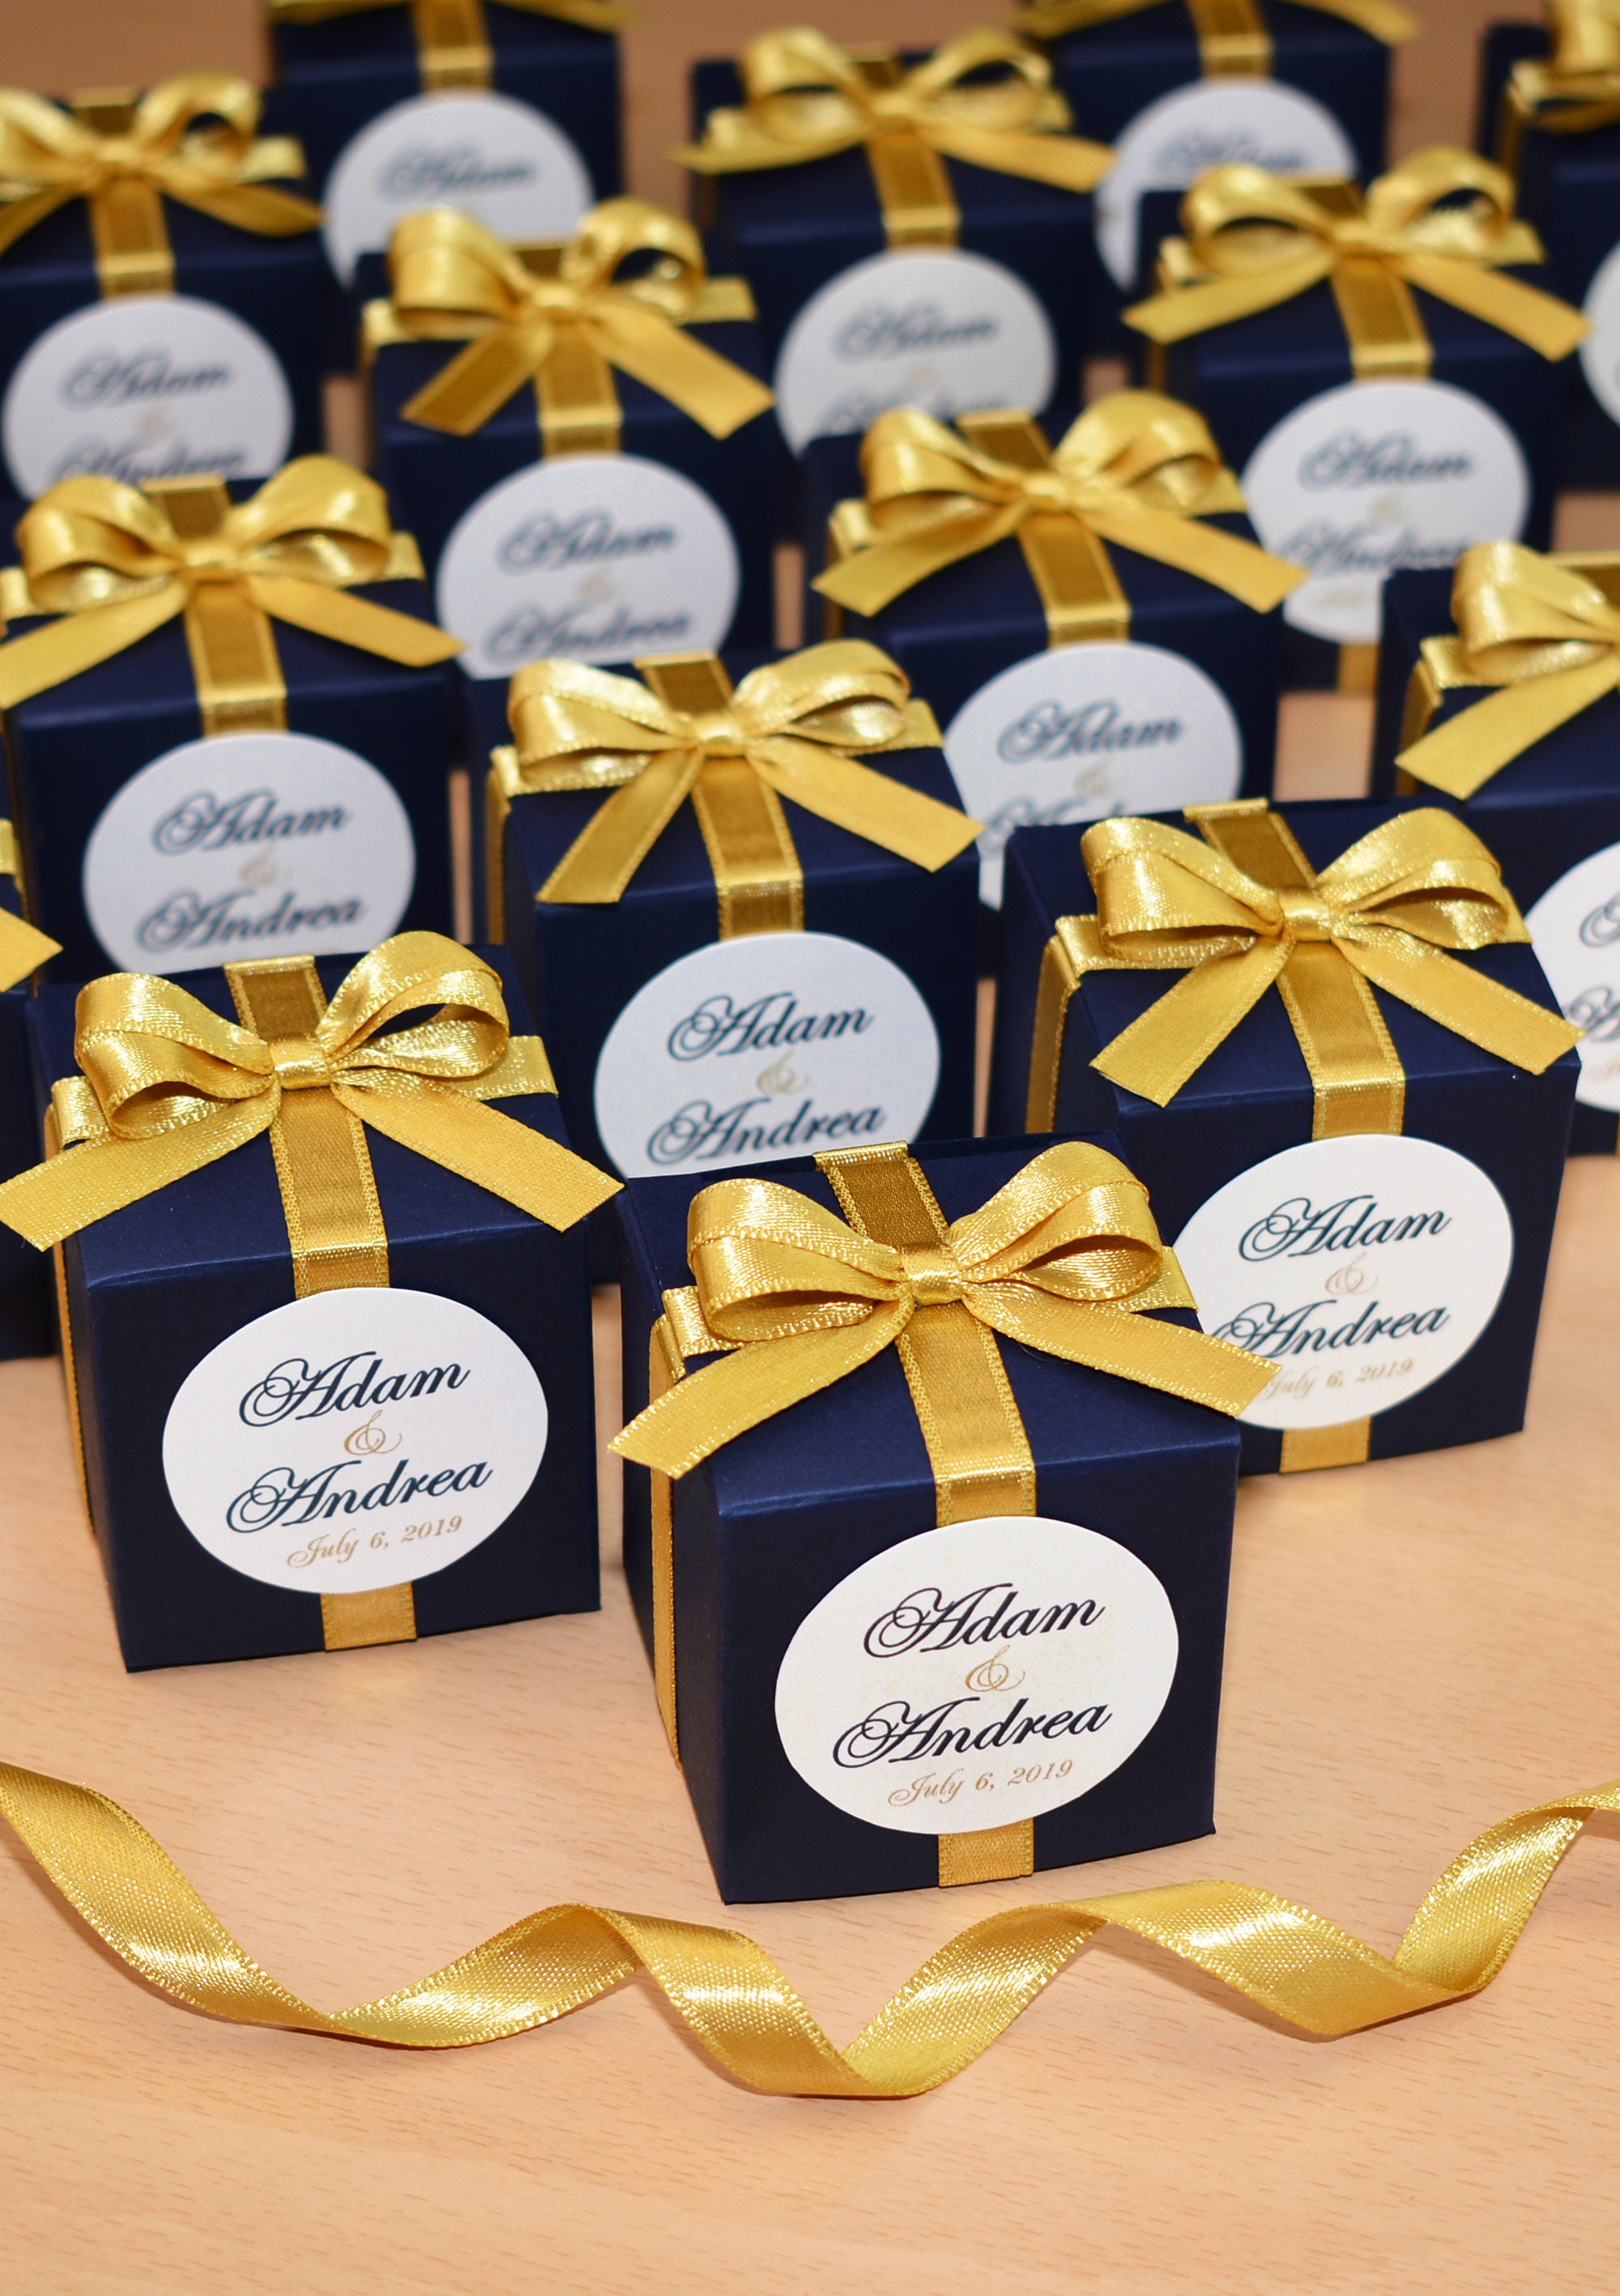 Navy Blue Wedding Favour Box With Golden Monogram Embroidery